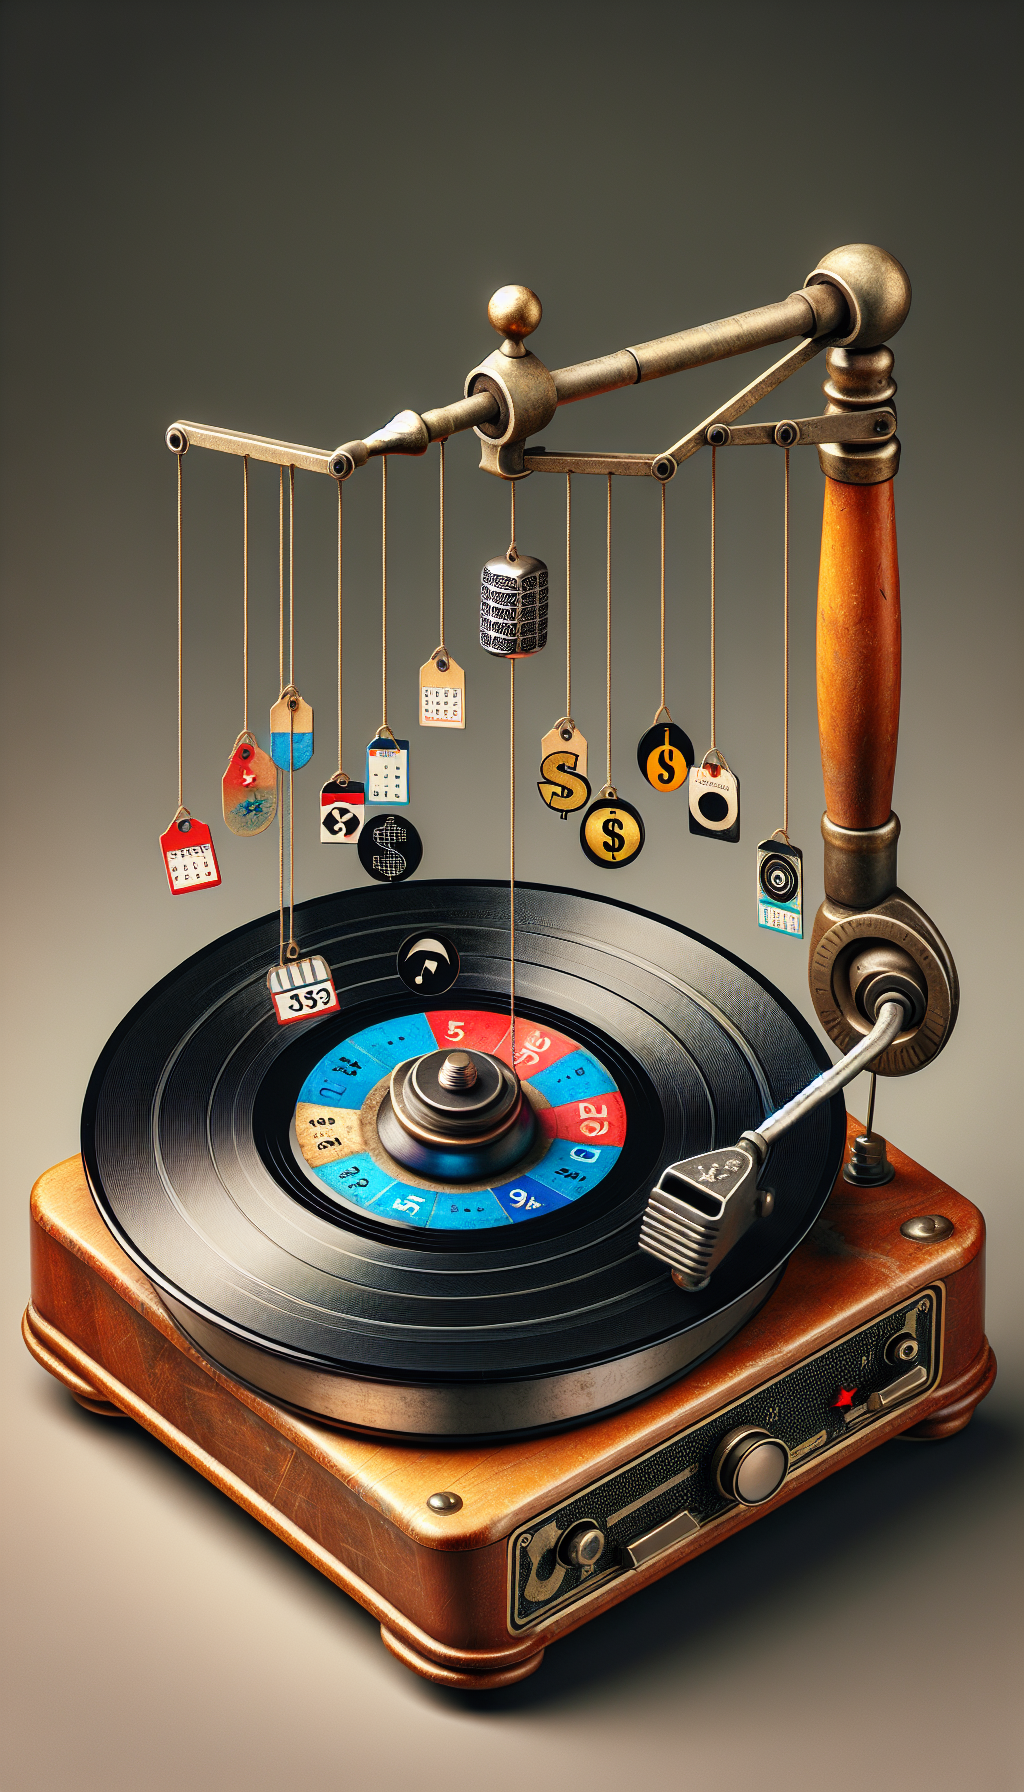 A retro-inspired turntable, with its arm replaced by a whimsical price tag pendulum, swings over a pile of assorted old vinyl records. Each record radiates lines with iconic symbols of various factors (like a dollar sign, calendar page, microphone, or star) that affect its market value, presenting a visual orchestration of the delicate dance between nostalgia and economics.